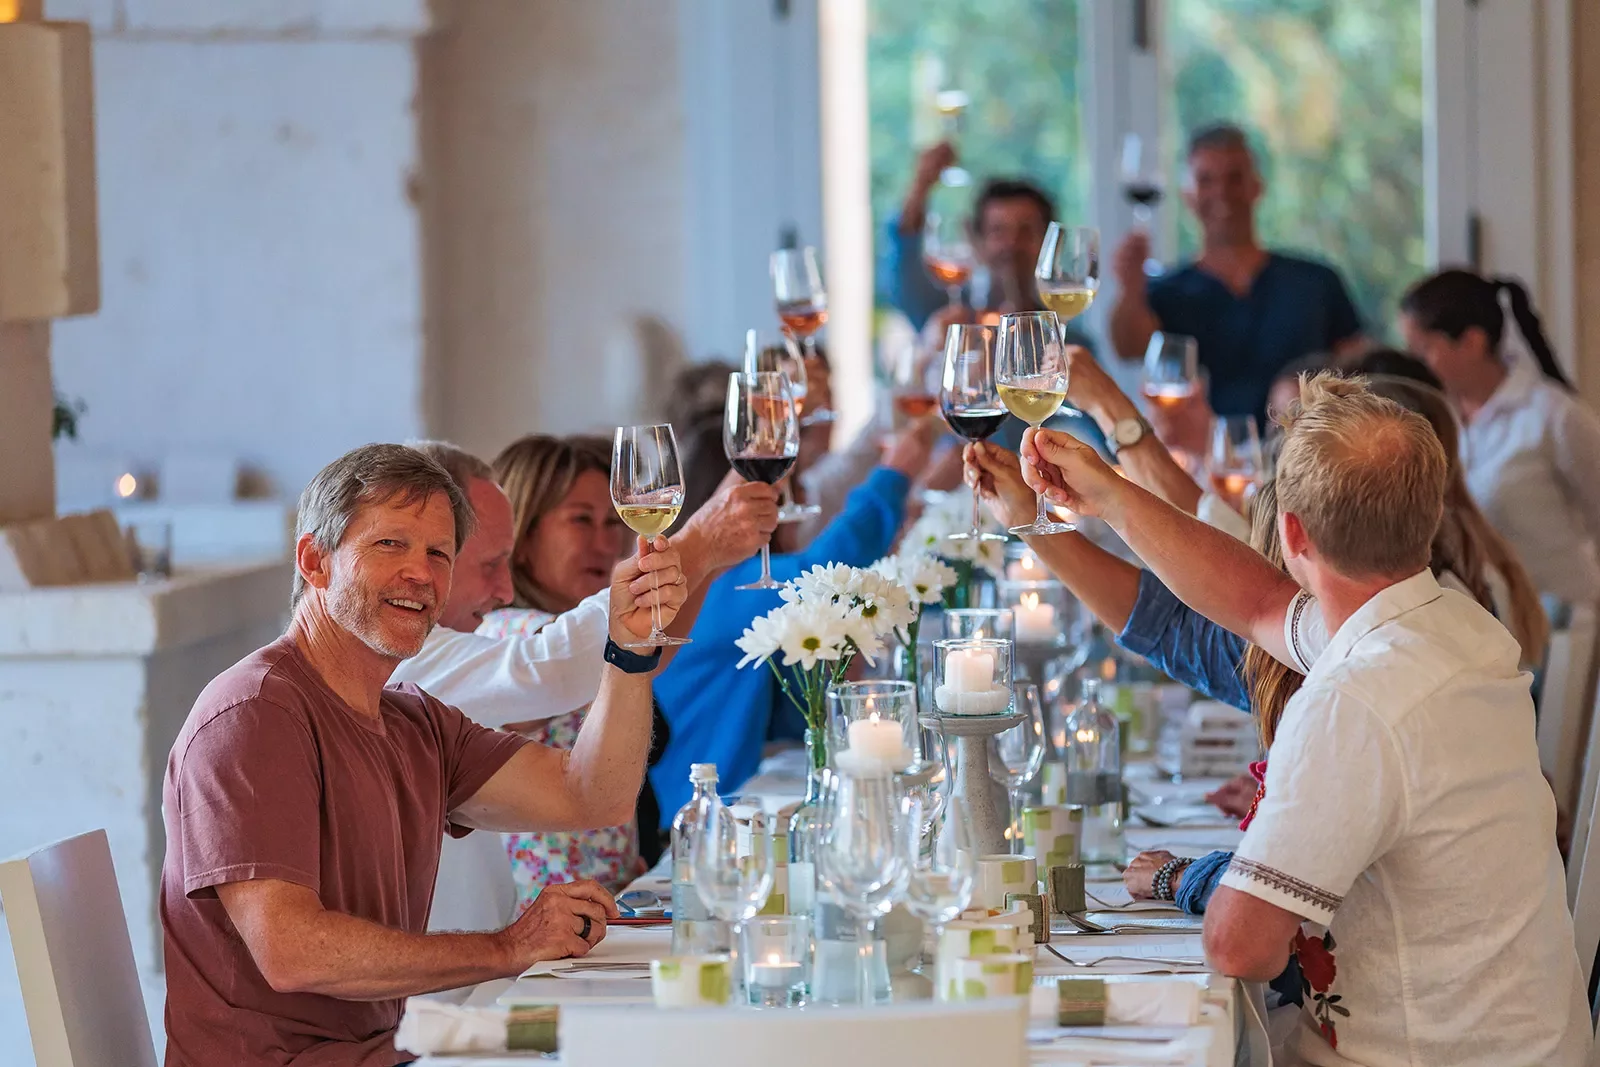 Group of guests at meal, toasting wine glasses.